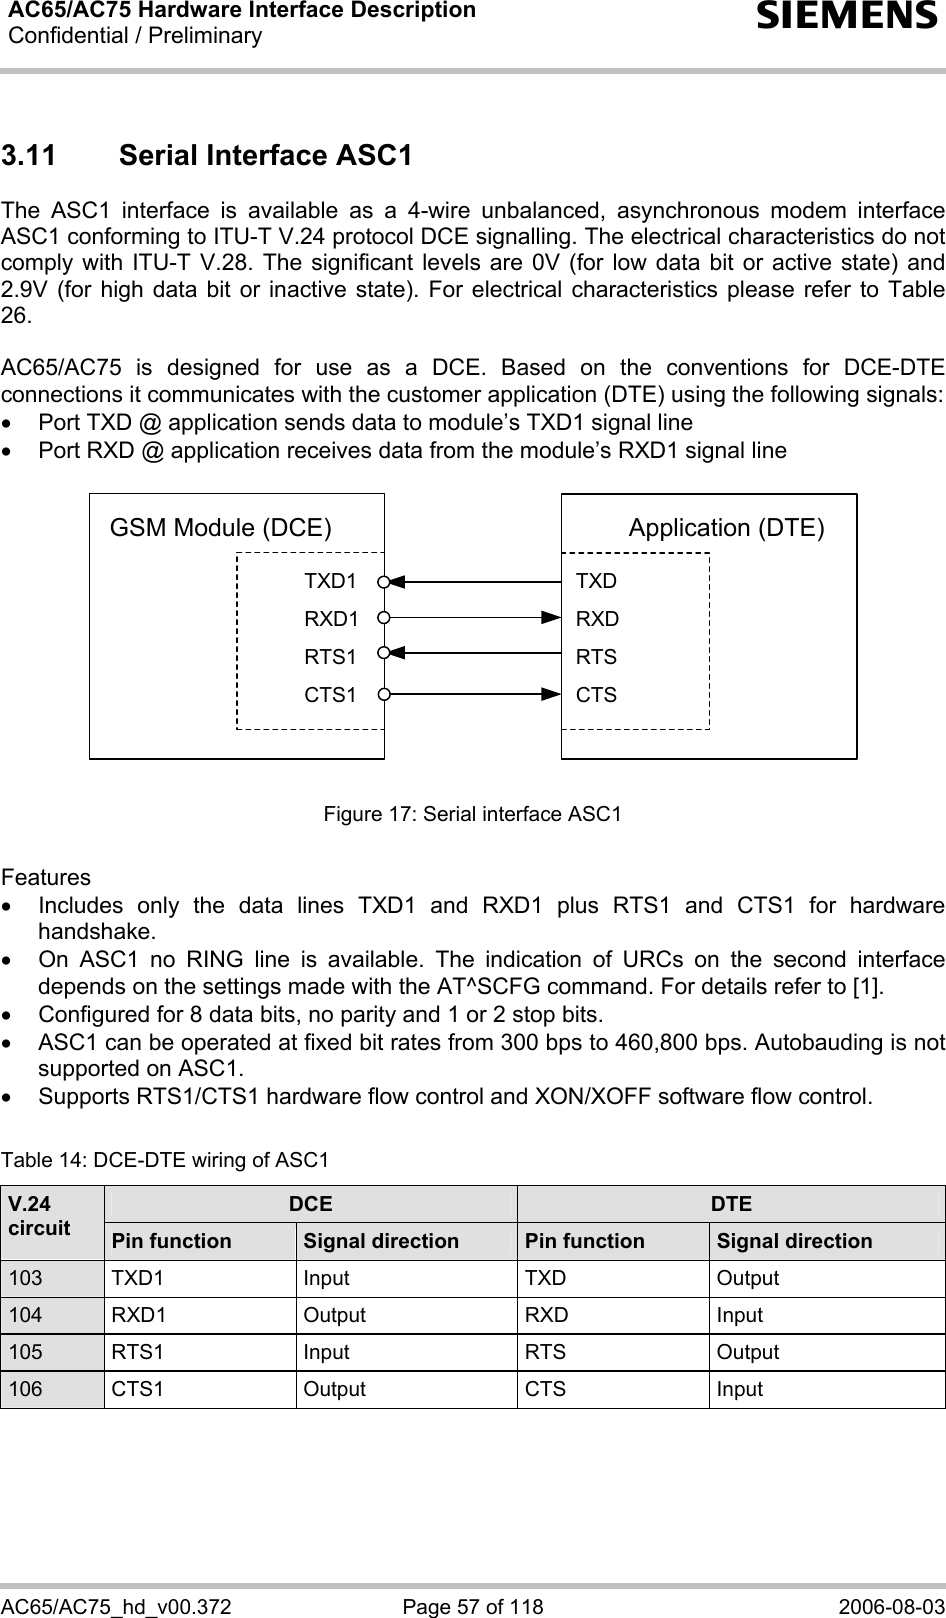 AC65/AC75 Hardware Interface Description Confidential / Preliminary   s AC65/AC75_hd_v00.372  Page 57 of 118  2006-08-03 3.11  Serial Interface ASC1 The ASC1 interface is available as a 4-wire unbalanced, asynchronous modem interface ASC1 conforming to ITU-T V.24 protocol DCE signalling. The electrical characteristics do not comply with ITU-T V.28. The significant levels are 0V (for low data bit or active state) and 2.9V (for high data bit or inactive state). For electrical characteristics please refer to Table 26.  AC65/AC75 is designed for use as a DCE. Based on the conventions for DCE-DTE connections it communicates with the customer application (DTE) using the following signals: •  Port TXD @ application sends data to module’s TXD1 signal line •  Port RXD @ application receives data from the module’s RXD1 signal line   Figure 17: Serial interface ASC1  Features •  Includes only the data lines TXD1 and RXD1 plus RTS1 and CTS1 for hardware handshake.  •  On ASC1 no RING line is available. The indication of URCs on the second interface depends on the settings made with the AT^SCFG command. For details refer to [1]. •  Configured for 8 data bits, no parity and 1 or 2 stop bits. •  ASC1 can be operated at fixed bit rates from 300 bps to 460,800 bps. Autobauding is not supported on ASC1. •  Supports RTS1/CTS1 hardware flow control and XON/XOFF software flow control.  Table 14: DCE-DTE wiring of ASC1 DCE  DTE V.24 circuit  Pin function  Signal direction  Pin function  Signal direction 103 TXD1  Input  TXD  Output 104 RXD1  Output  RXD  Input 105 RTS1  Input  RTS  Output 106 CTS1  Output  CTS  Input  TXD1RXD1RTS1CTS1TXDRXDRTSCTSGSM Module (DCE) Application (DTE)